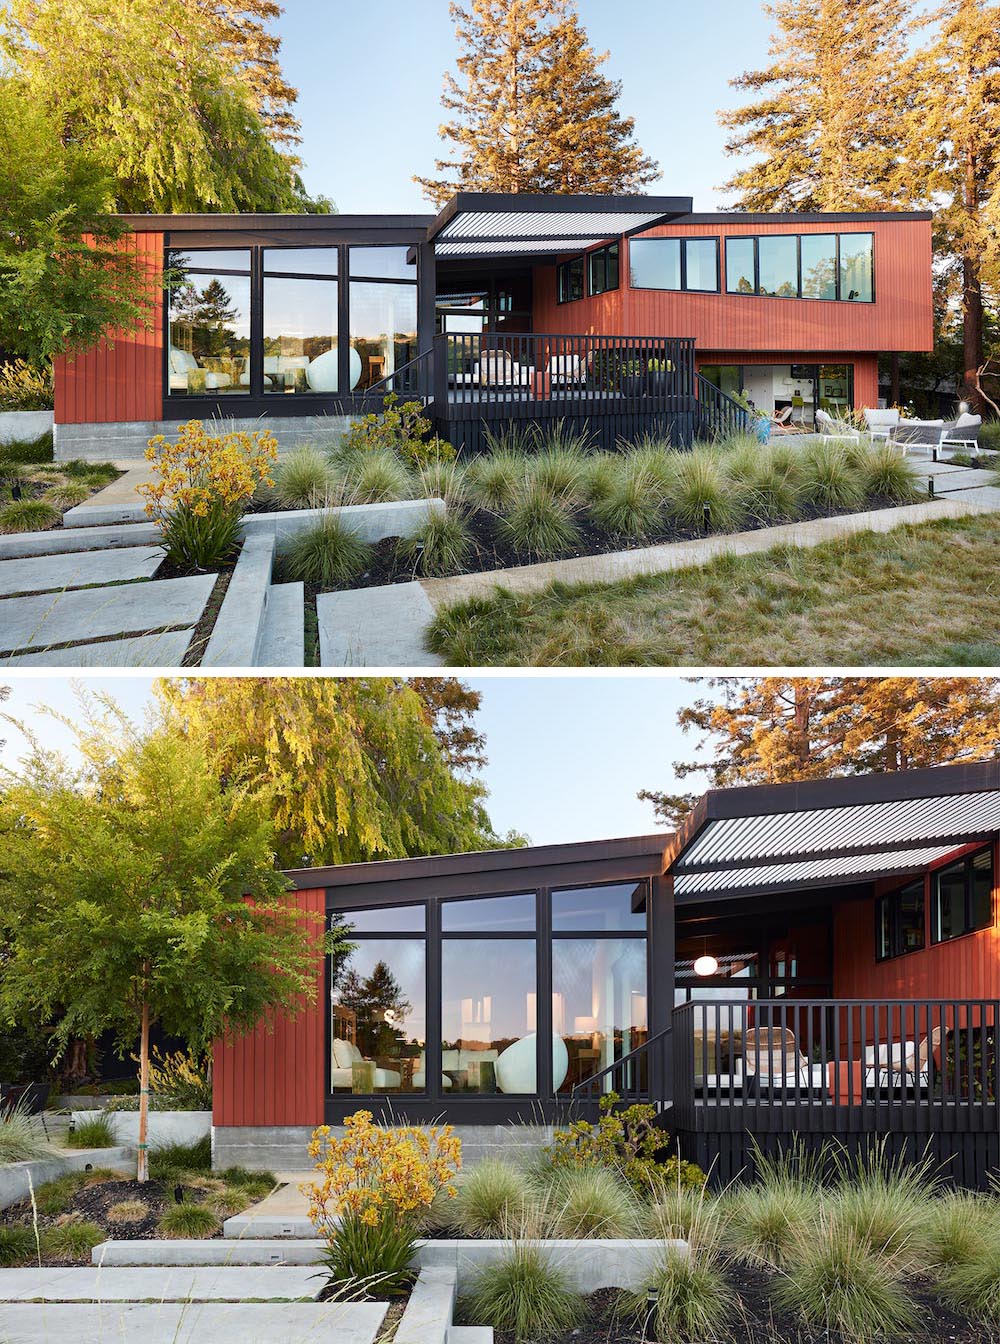 A remodeled mid-century modern house with a mix of relaxing outdoor patio spaces that blend into the native landscaping.